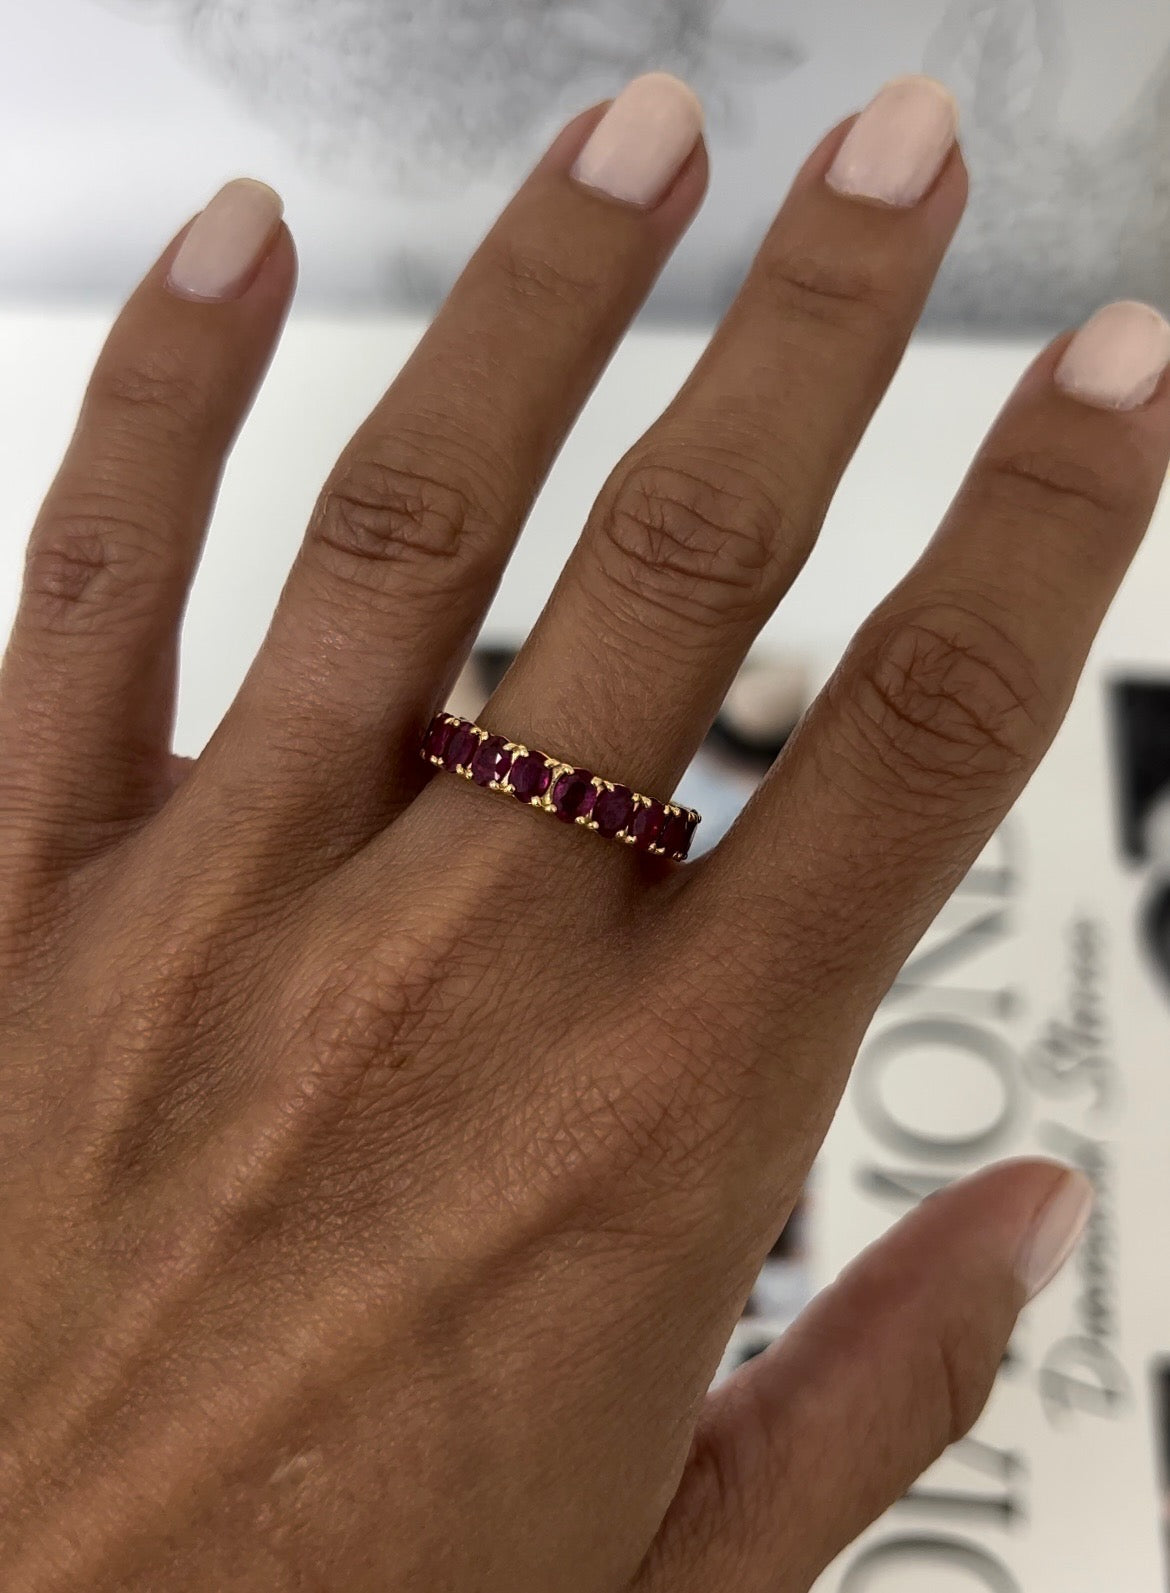 Oval Ruby Eternity Band